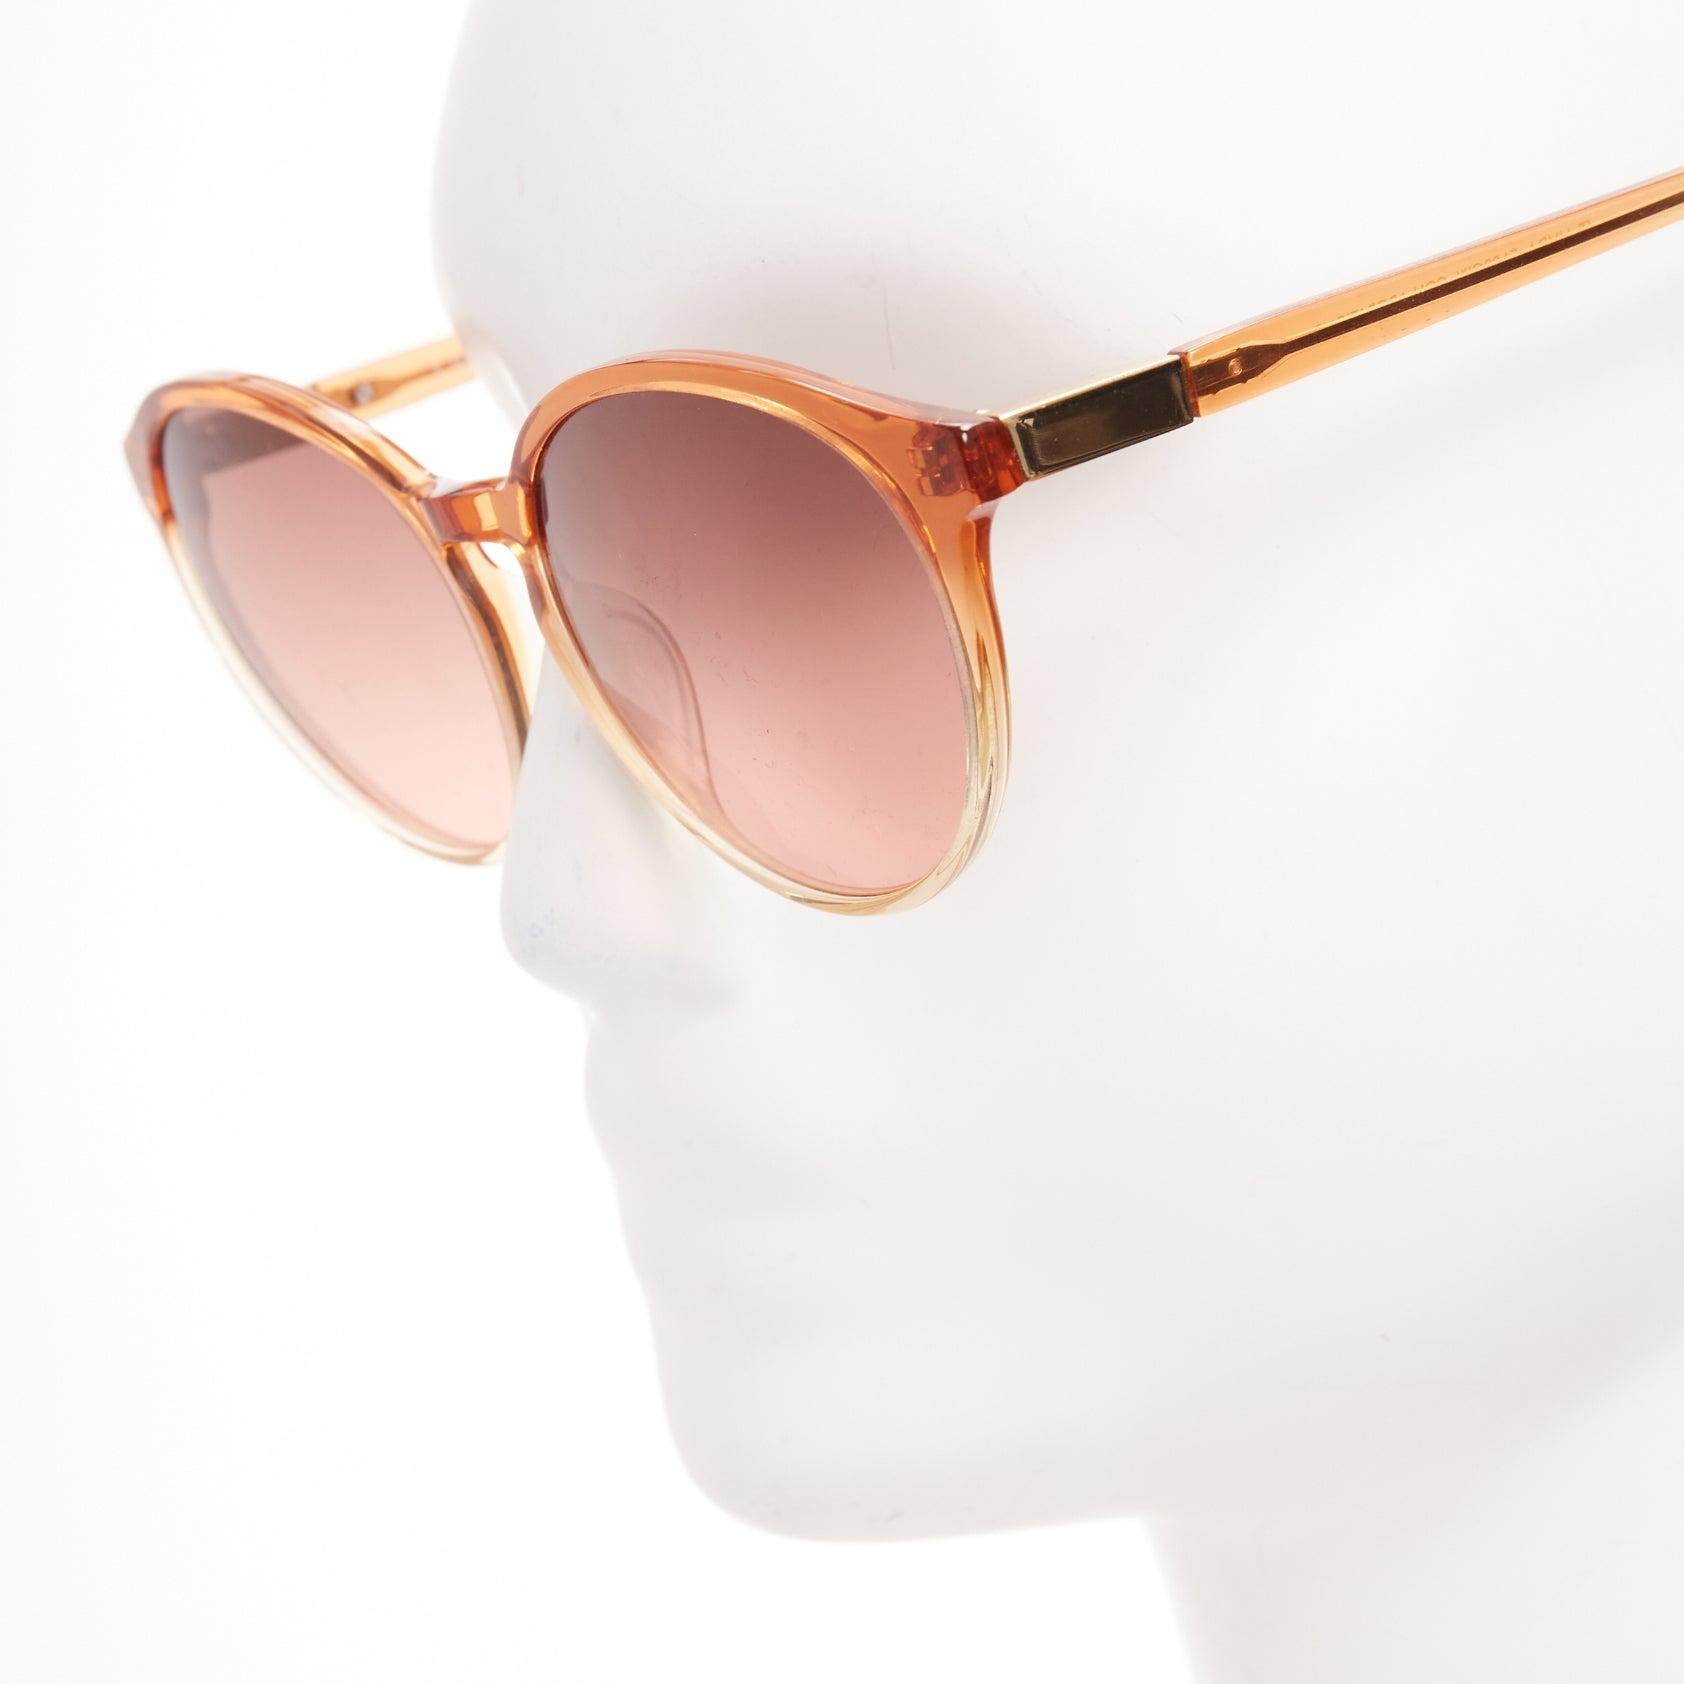 THE ROW Linda Farrow brown ombre acetate pink lens oversized sunglasses
Reference: AAWC/A01016
Brand: The Row
Designer: Mary Kate and Ashley Olsen
Collection: Linda Farrow
Material: Acetate
Color: Brown, Nude
Pattern: Solid
Lining: Brown